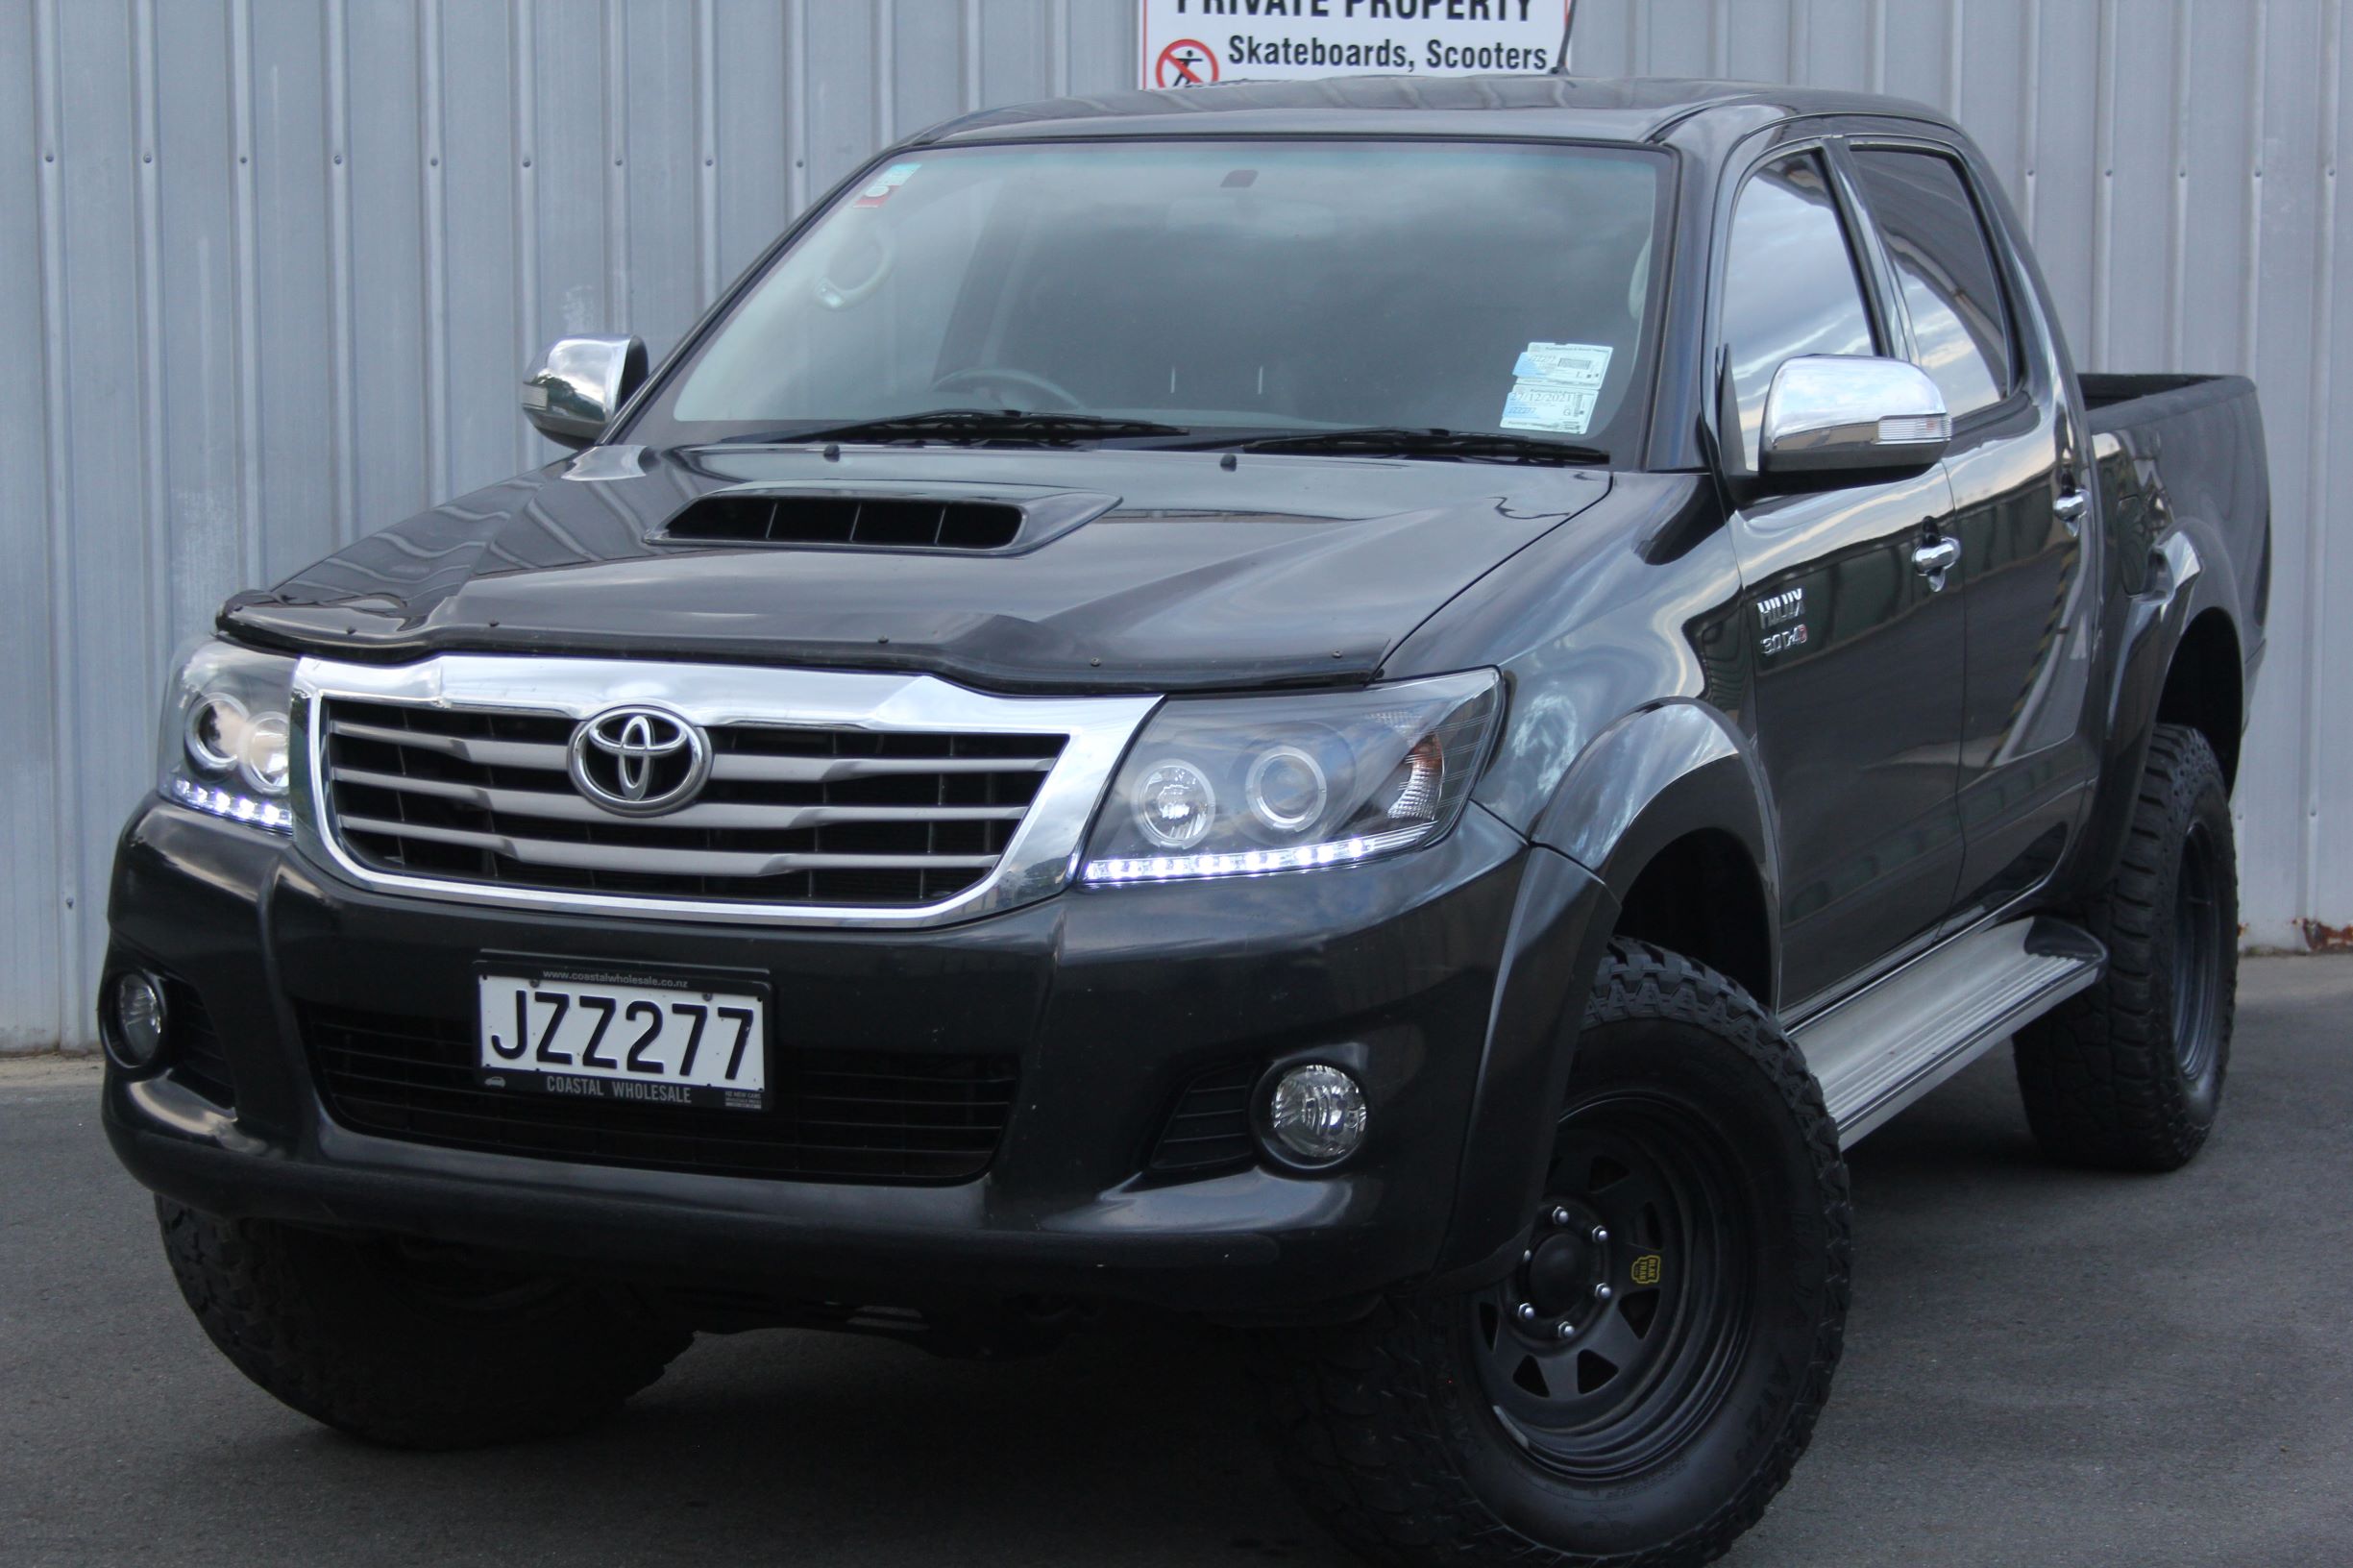 Toyota Hilux 4WD manual SR5 2013 for sale in Auckland